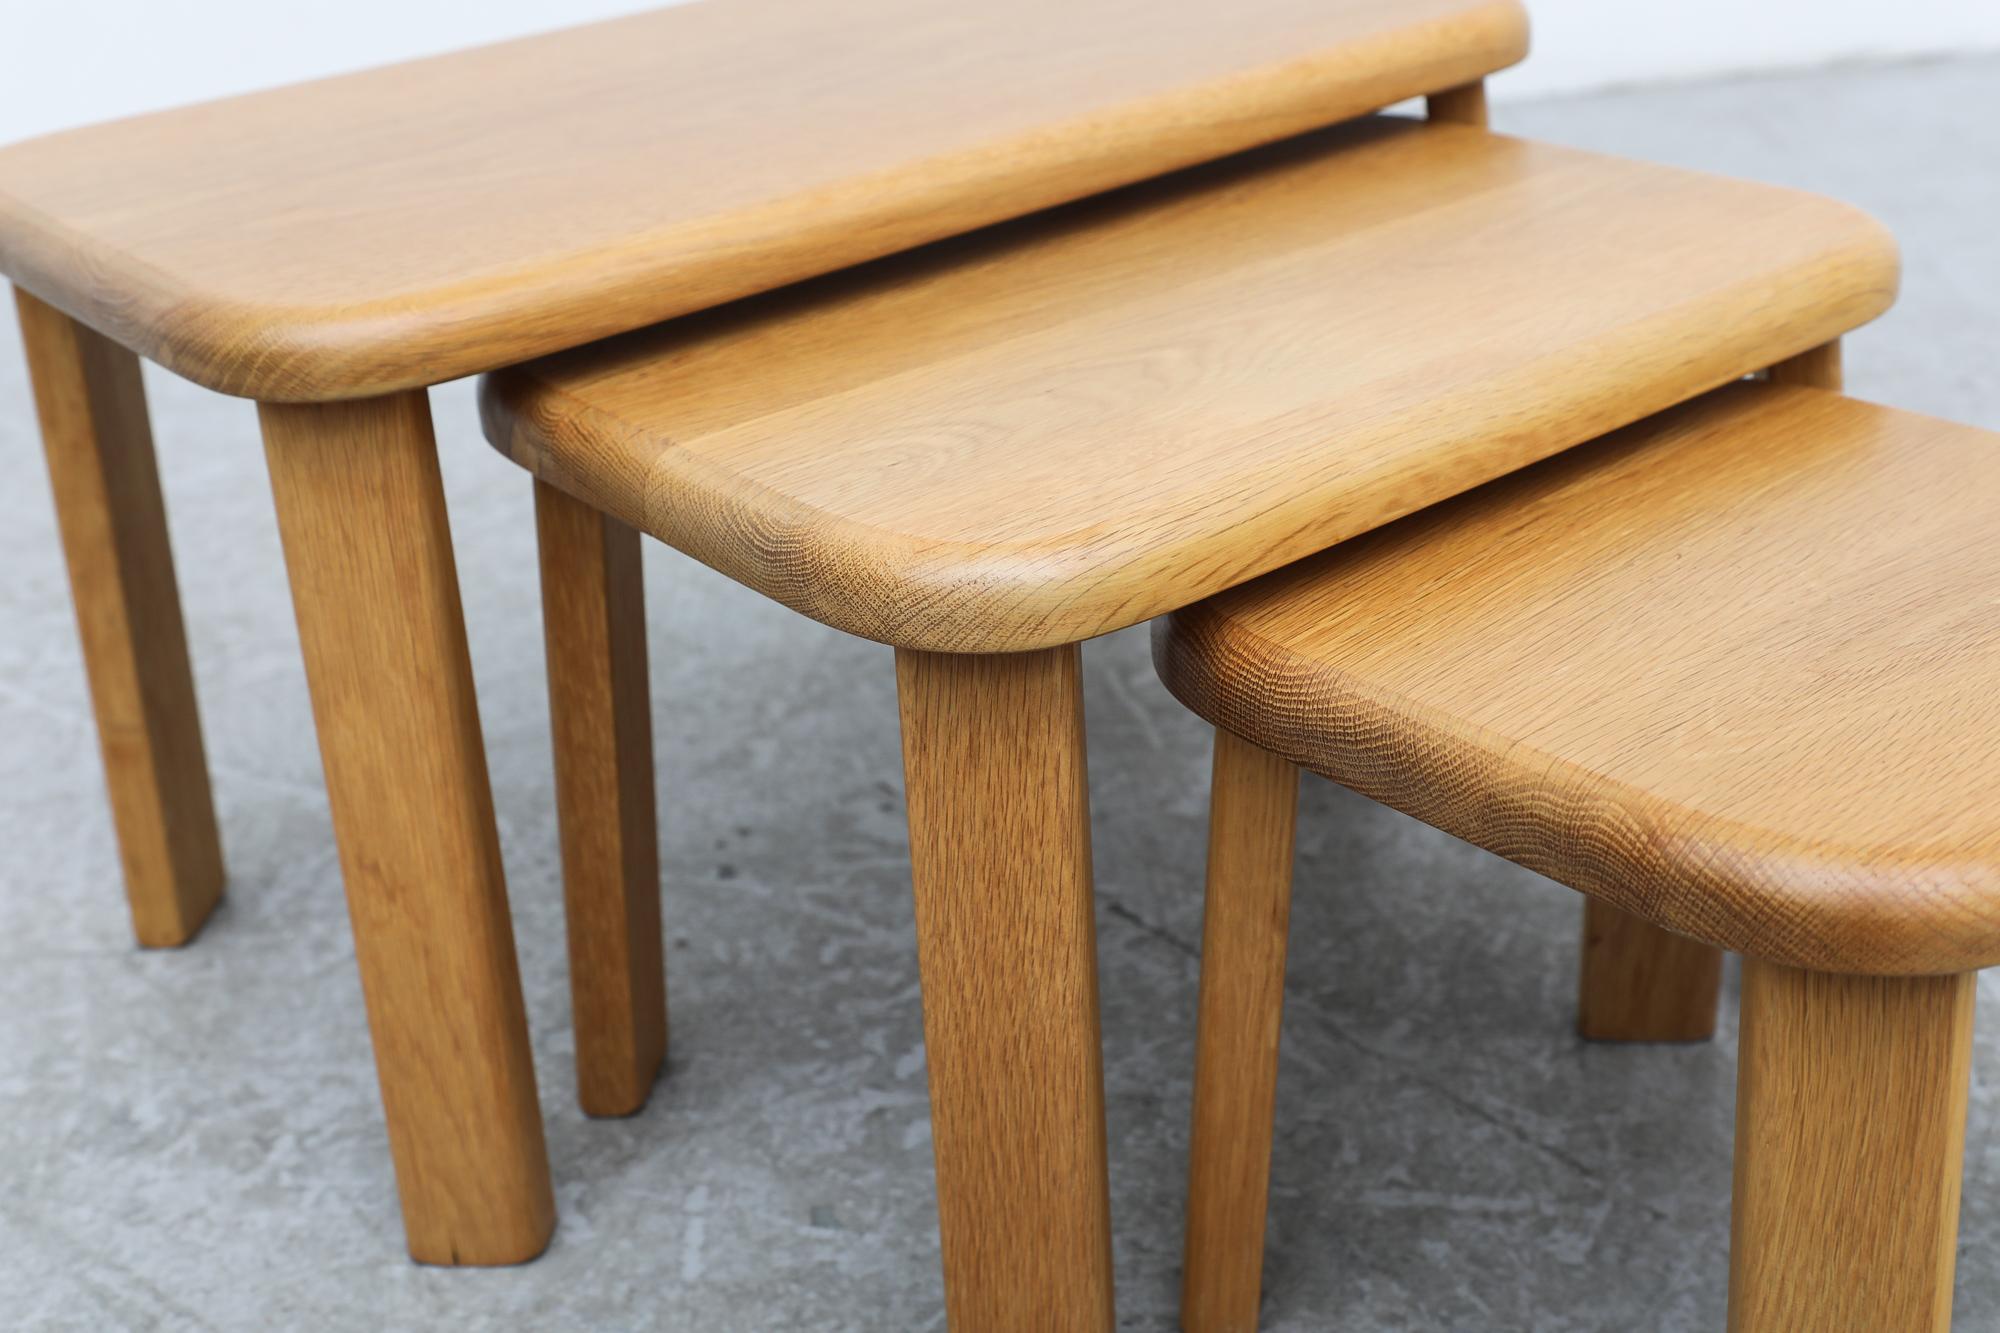 Set of 3 Charlotte Perriand Inspired Natural Oak Nesting Tables w/ Rounded Edges For Sale 8